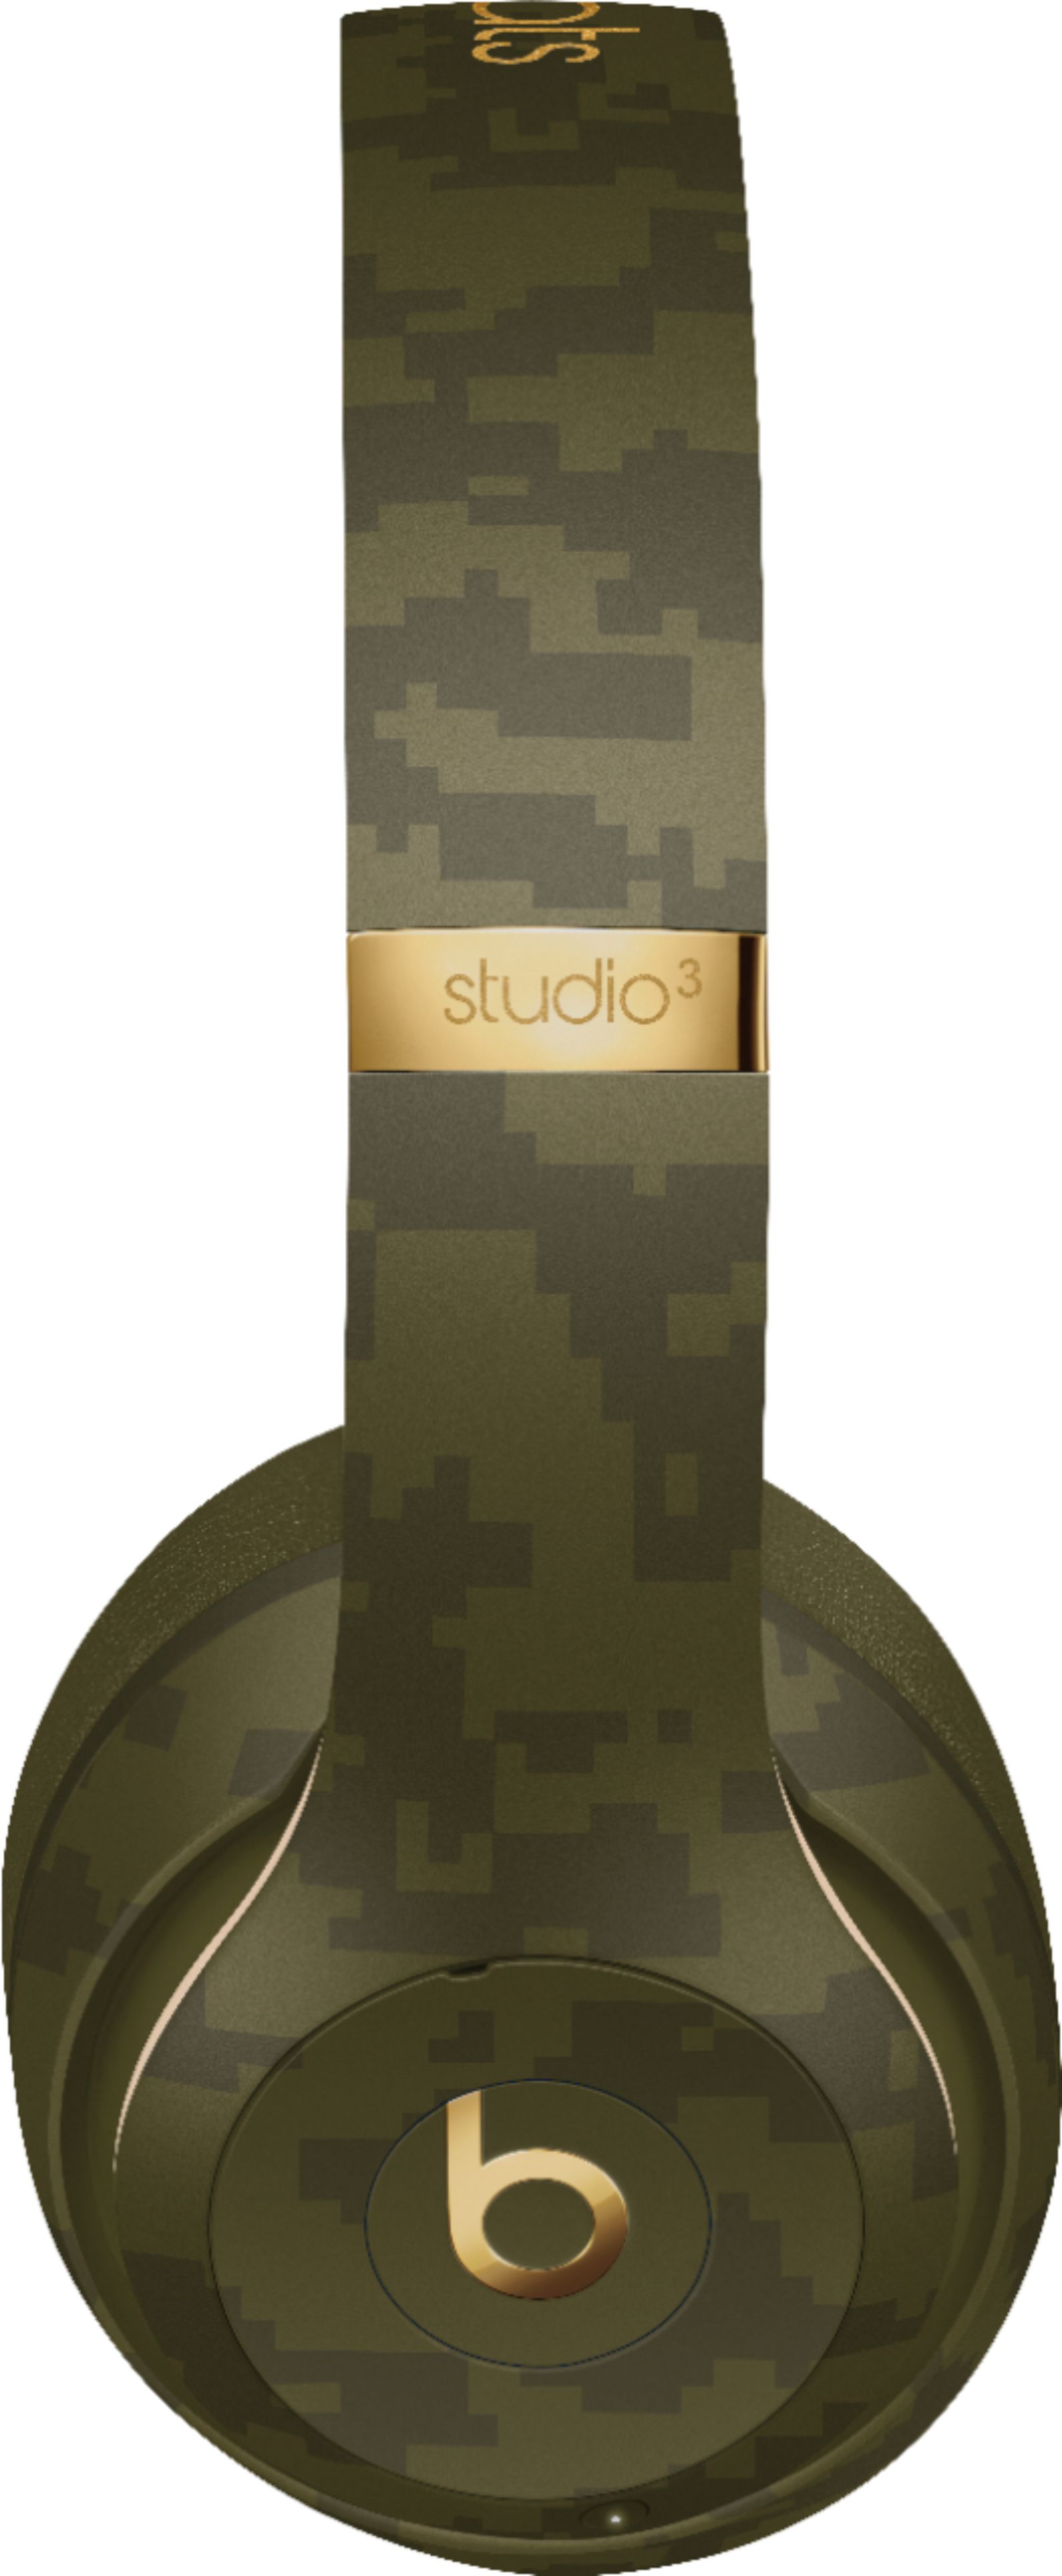 Beats by Dr. Dre Studio3 Wireless Noise Cancelling Headphones Camo  Collection MWUJ2LL/A Sand Dune - US